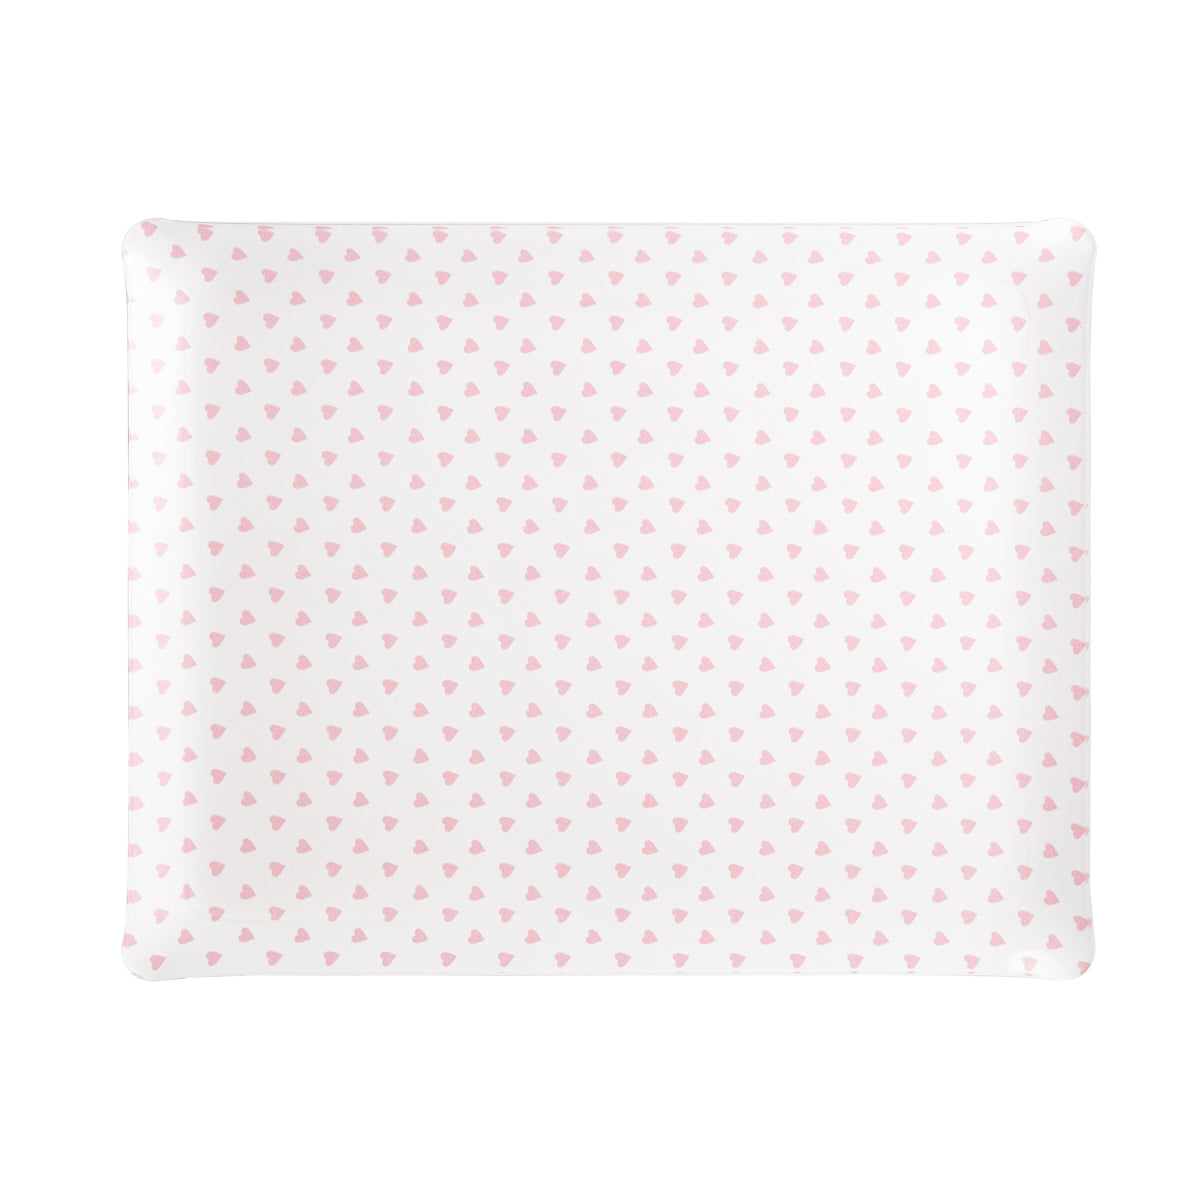 Fabric Tray Large 46X36 - Pink Heart